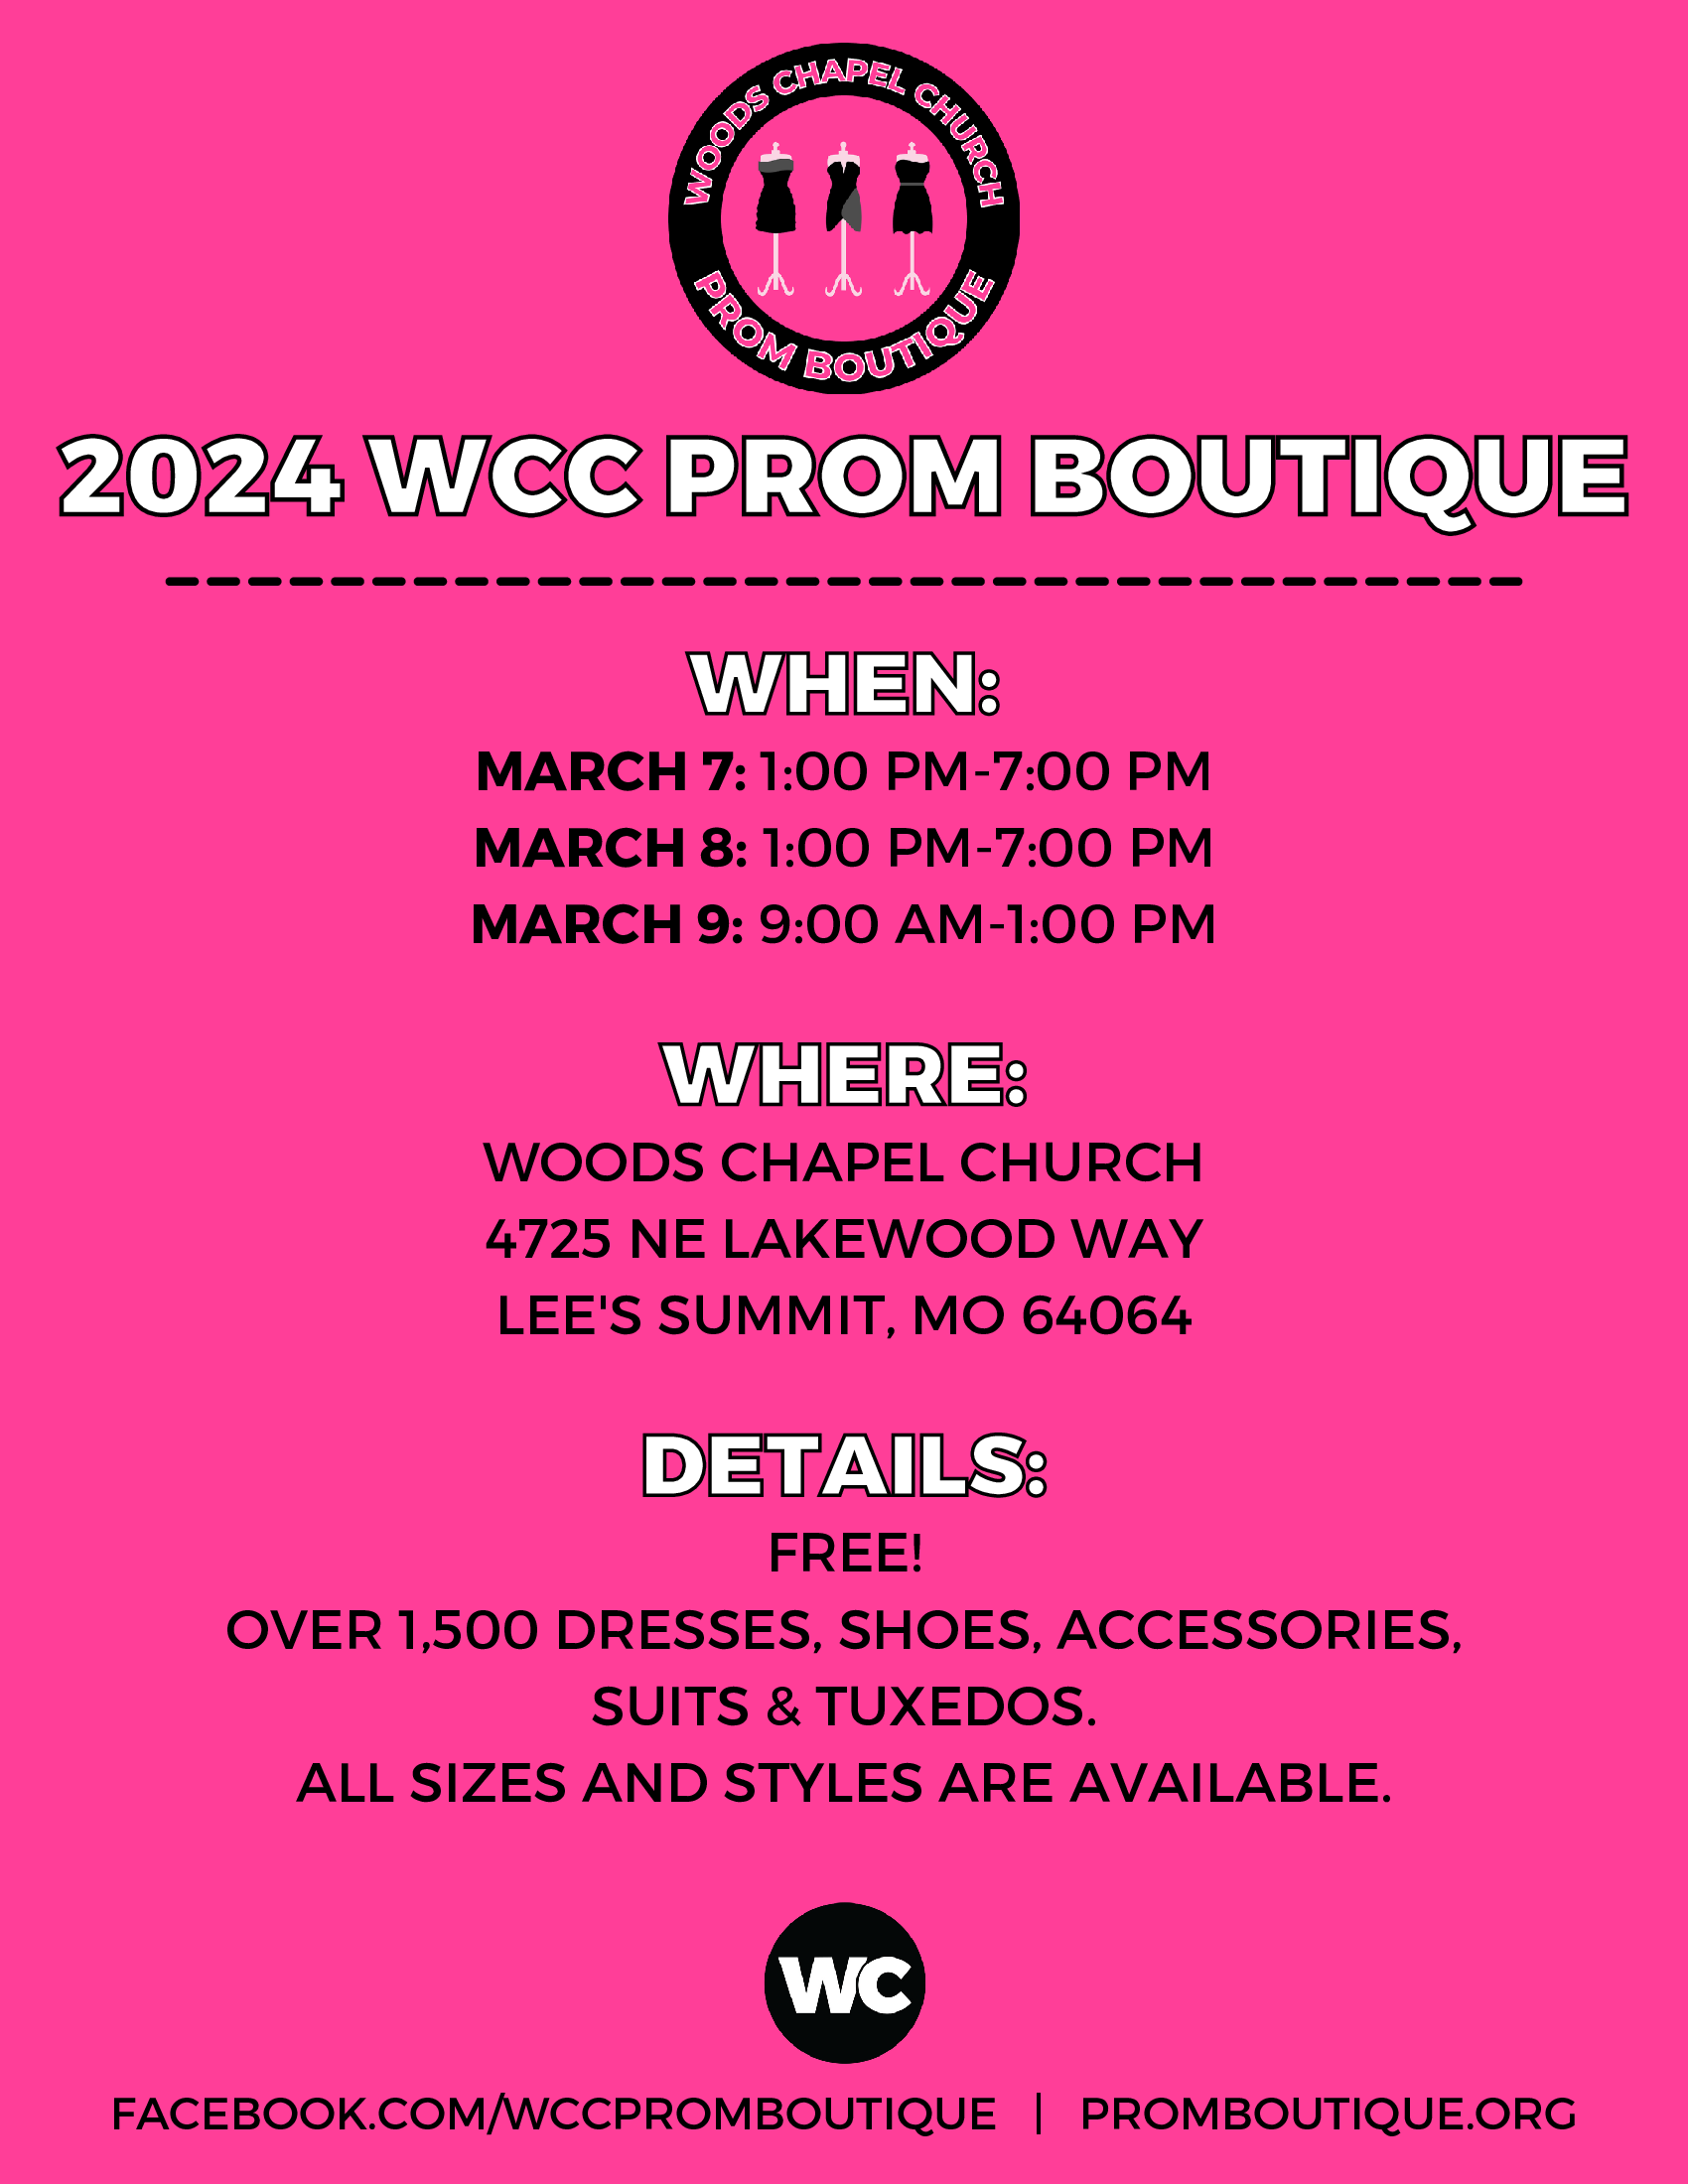 2024-wcc-prom-boutique-_8-5-x-11-in_-_1_